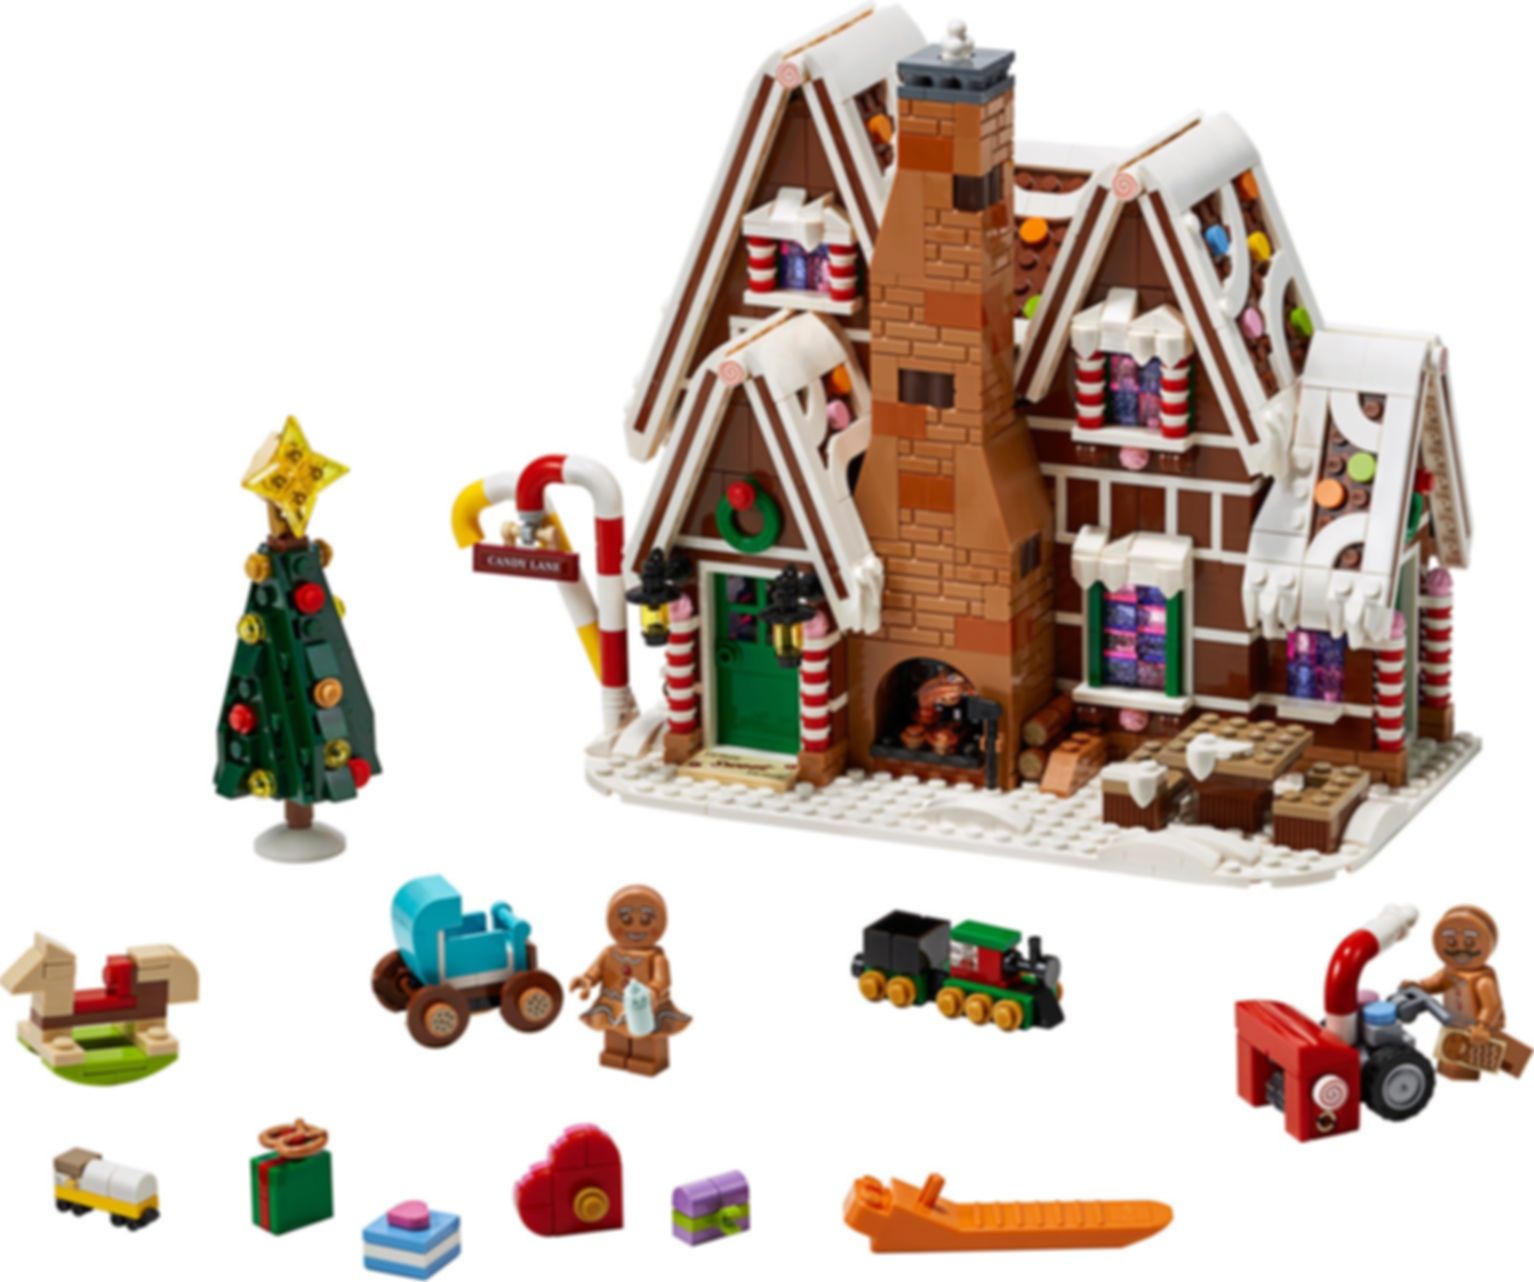 LEGO® Creator Expert Gingerbread House components